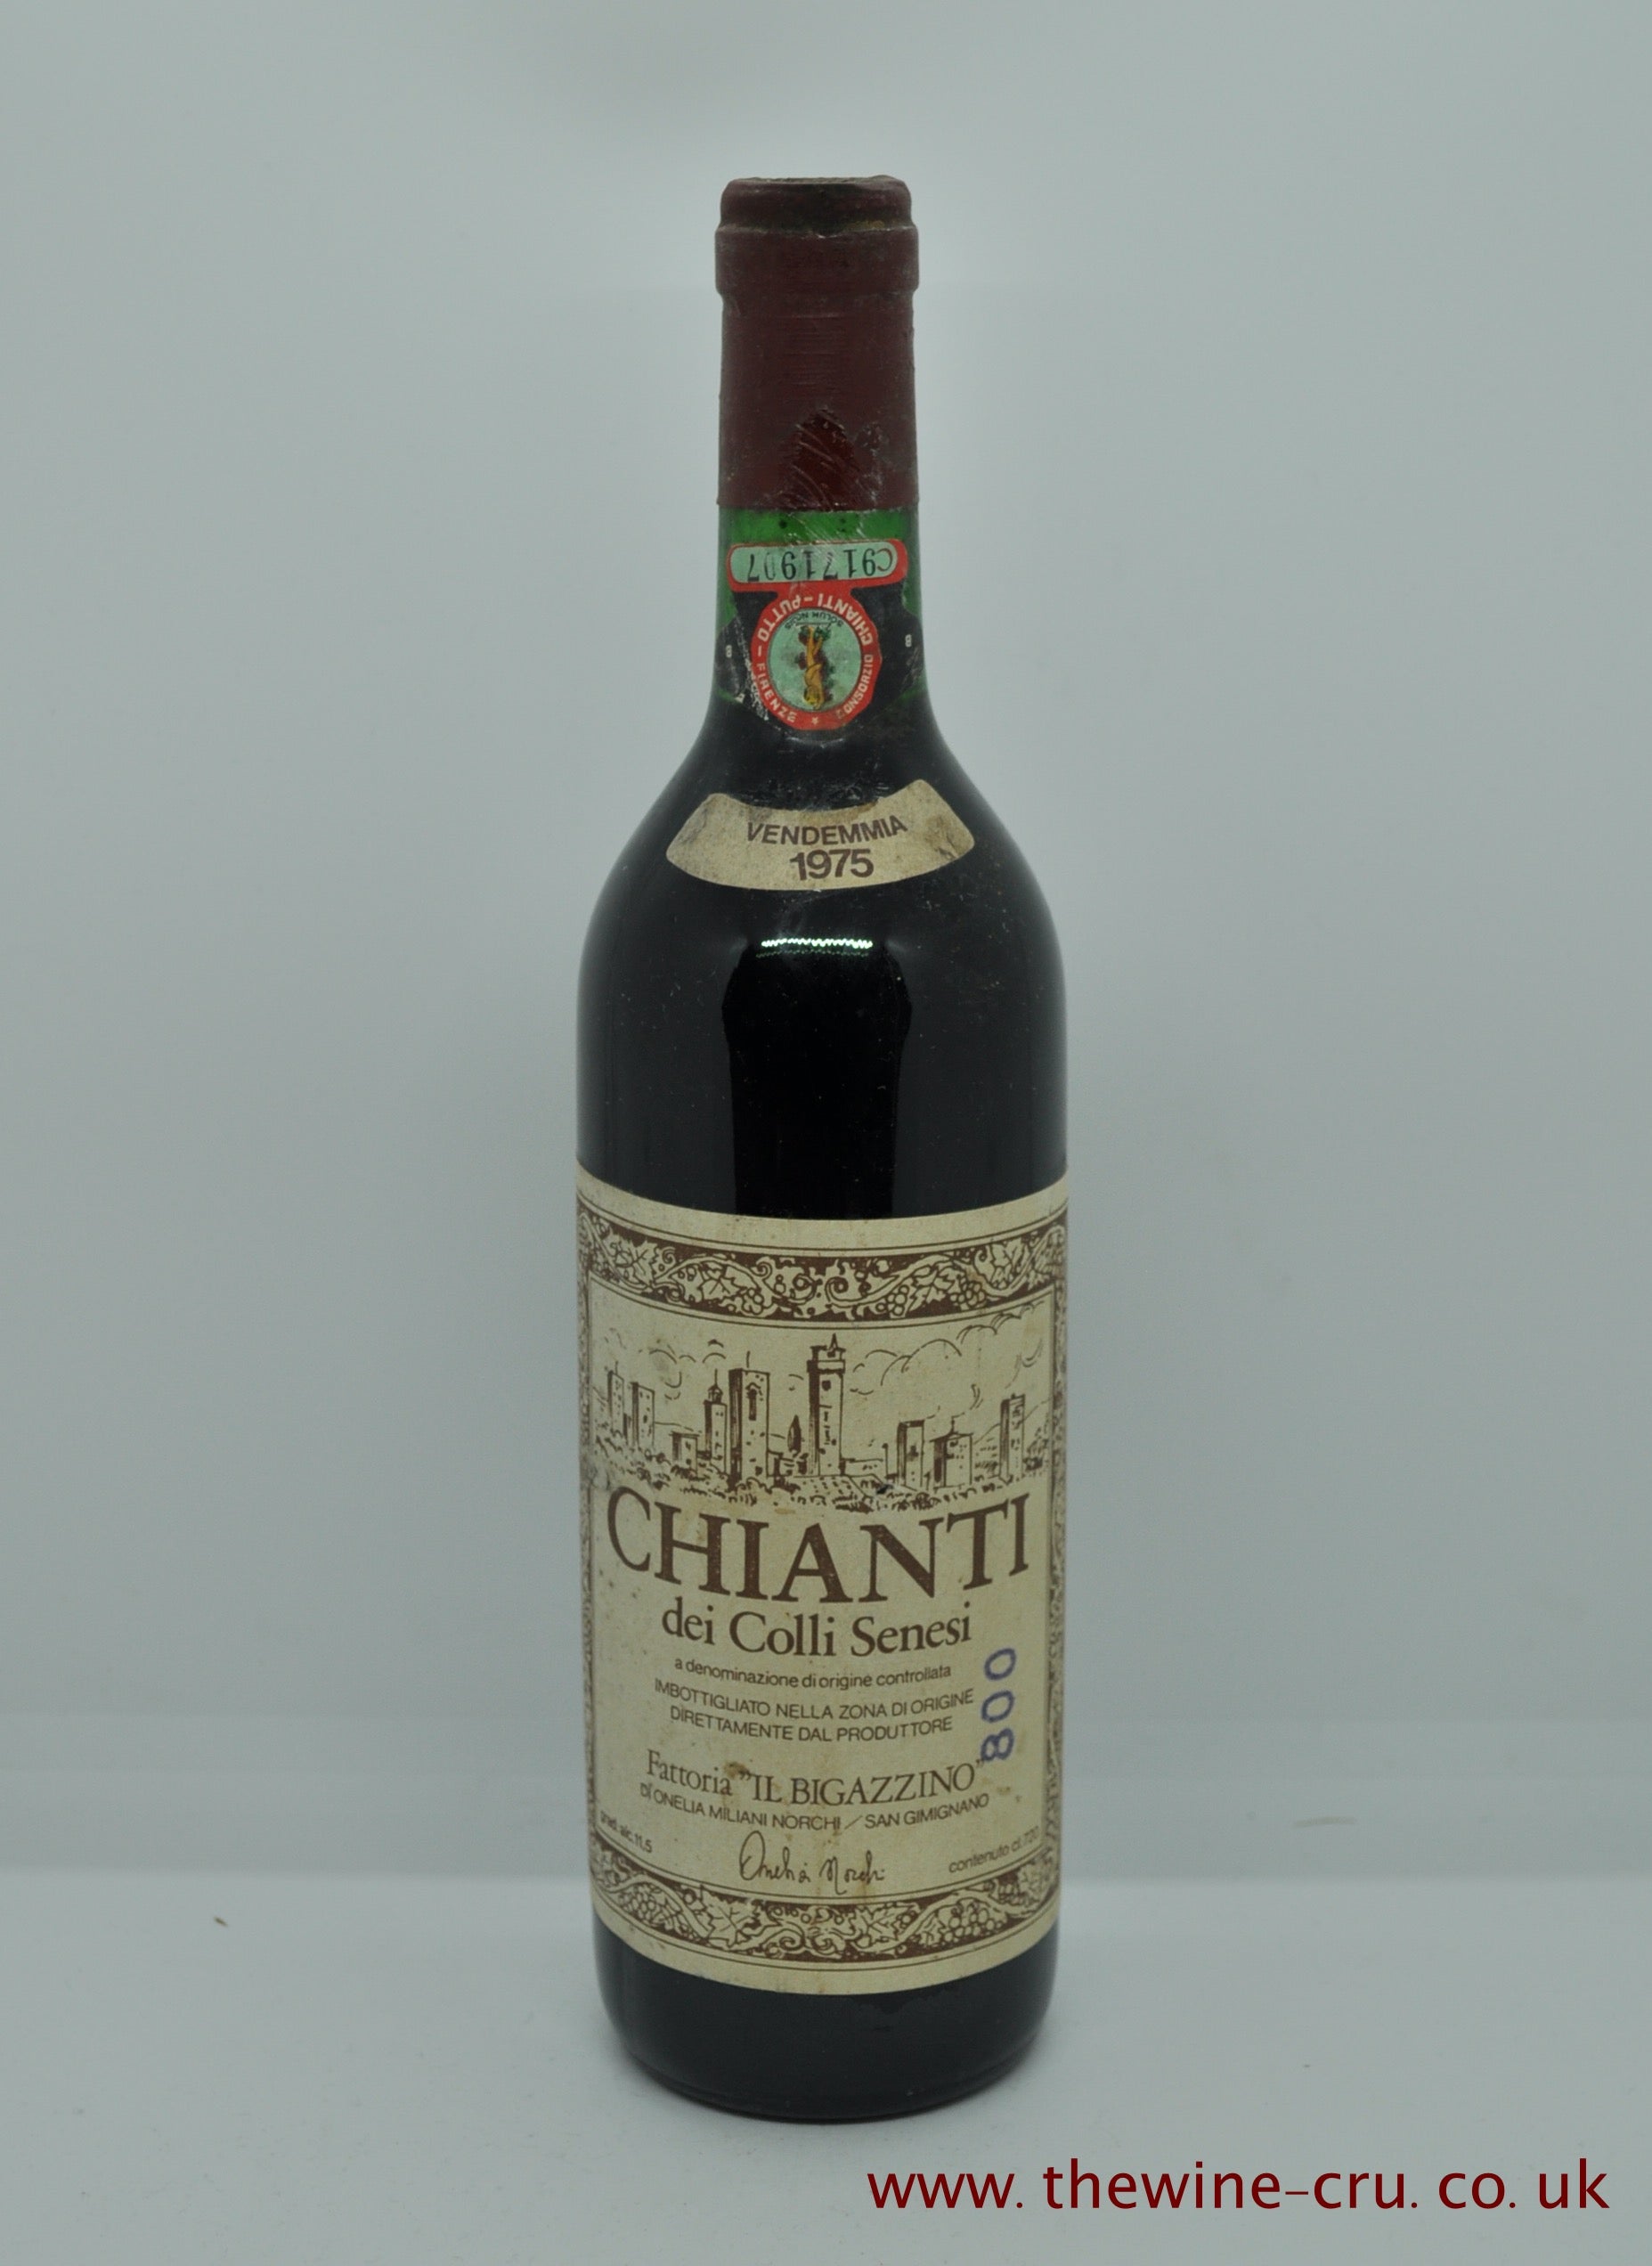 1975 vintage re wine. Chianti Dei Colli Senesi Fattoria Il Bigazzino. Italy. The bottle is in good condition with the level being in the neck. Immediate delivery. free local delivery. Gift wrapping available.